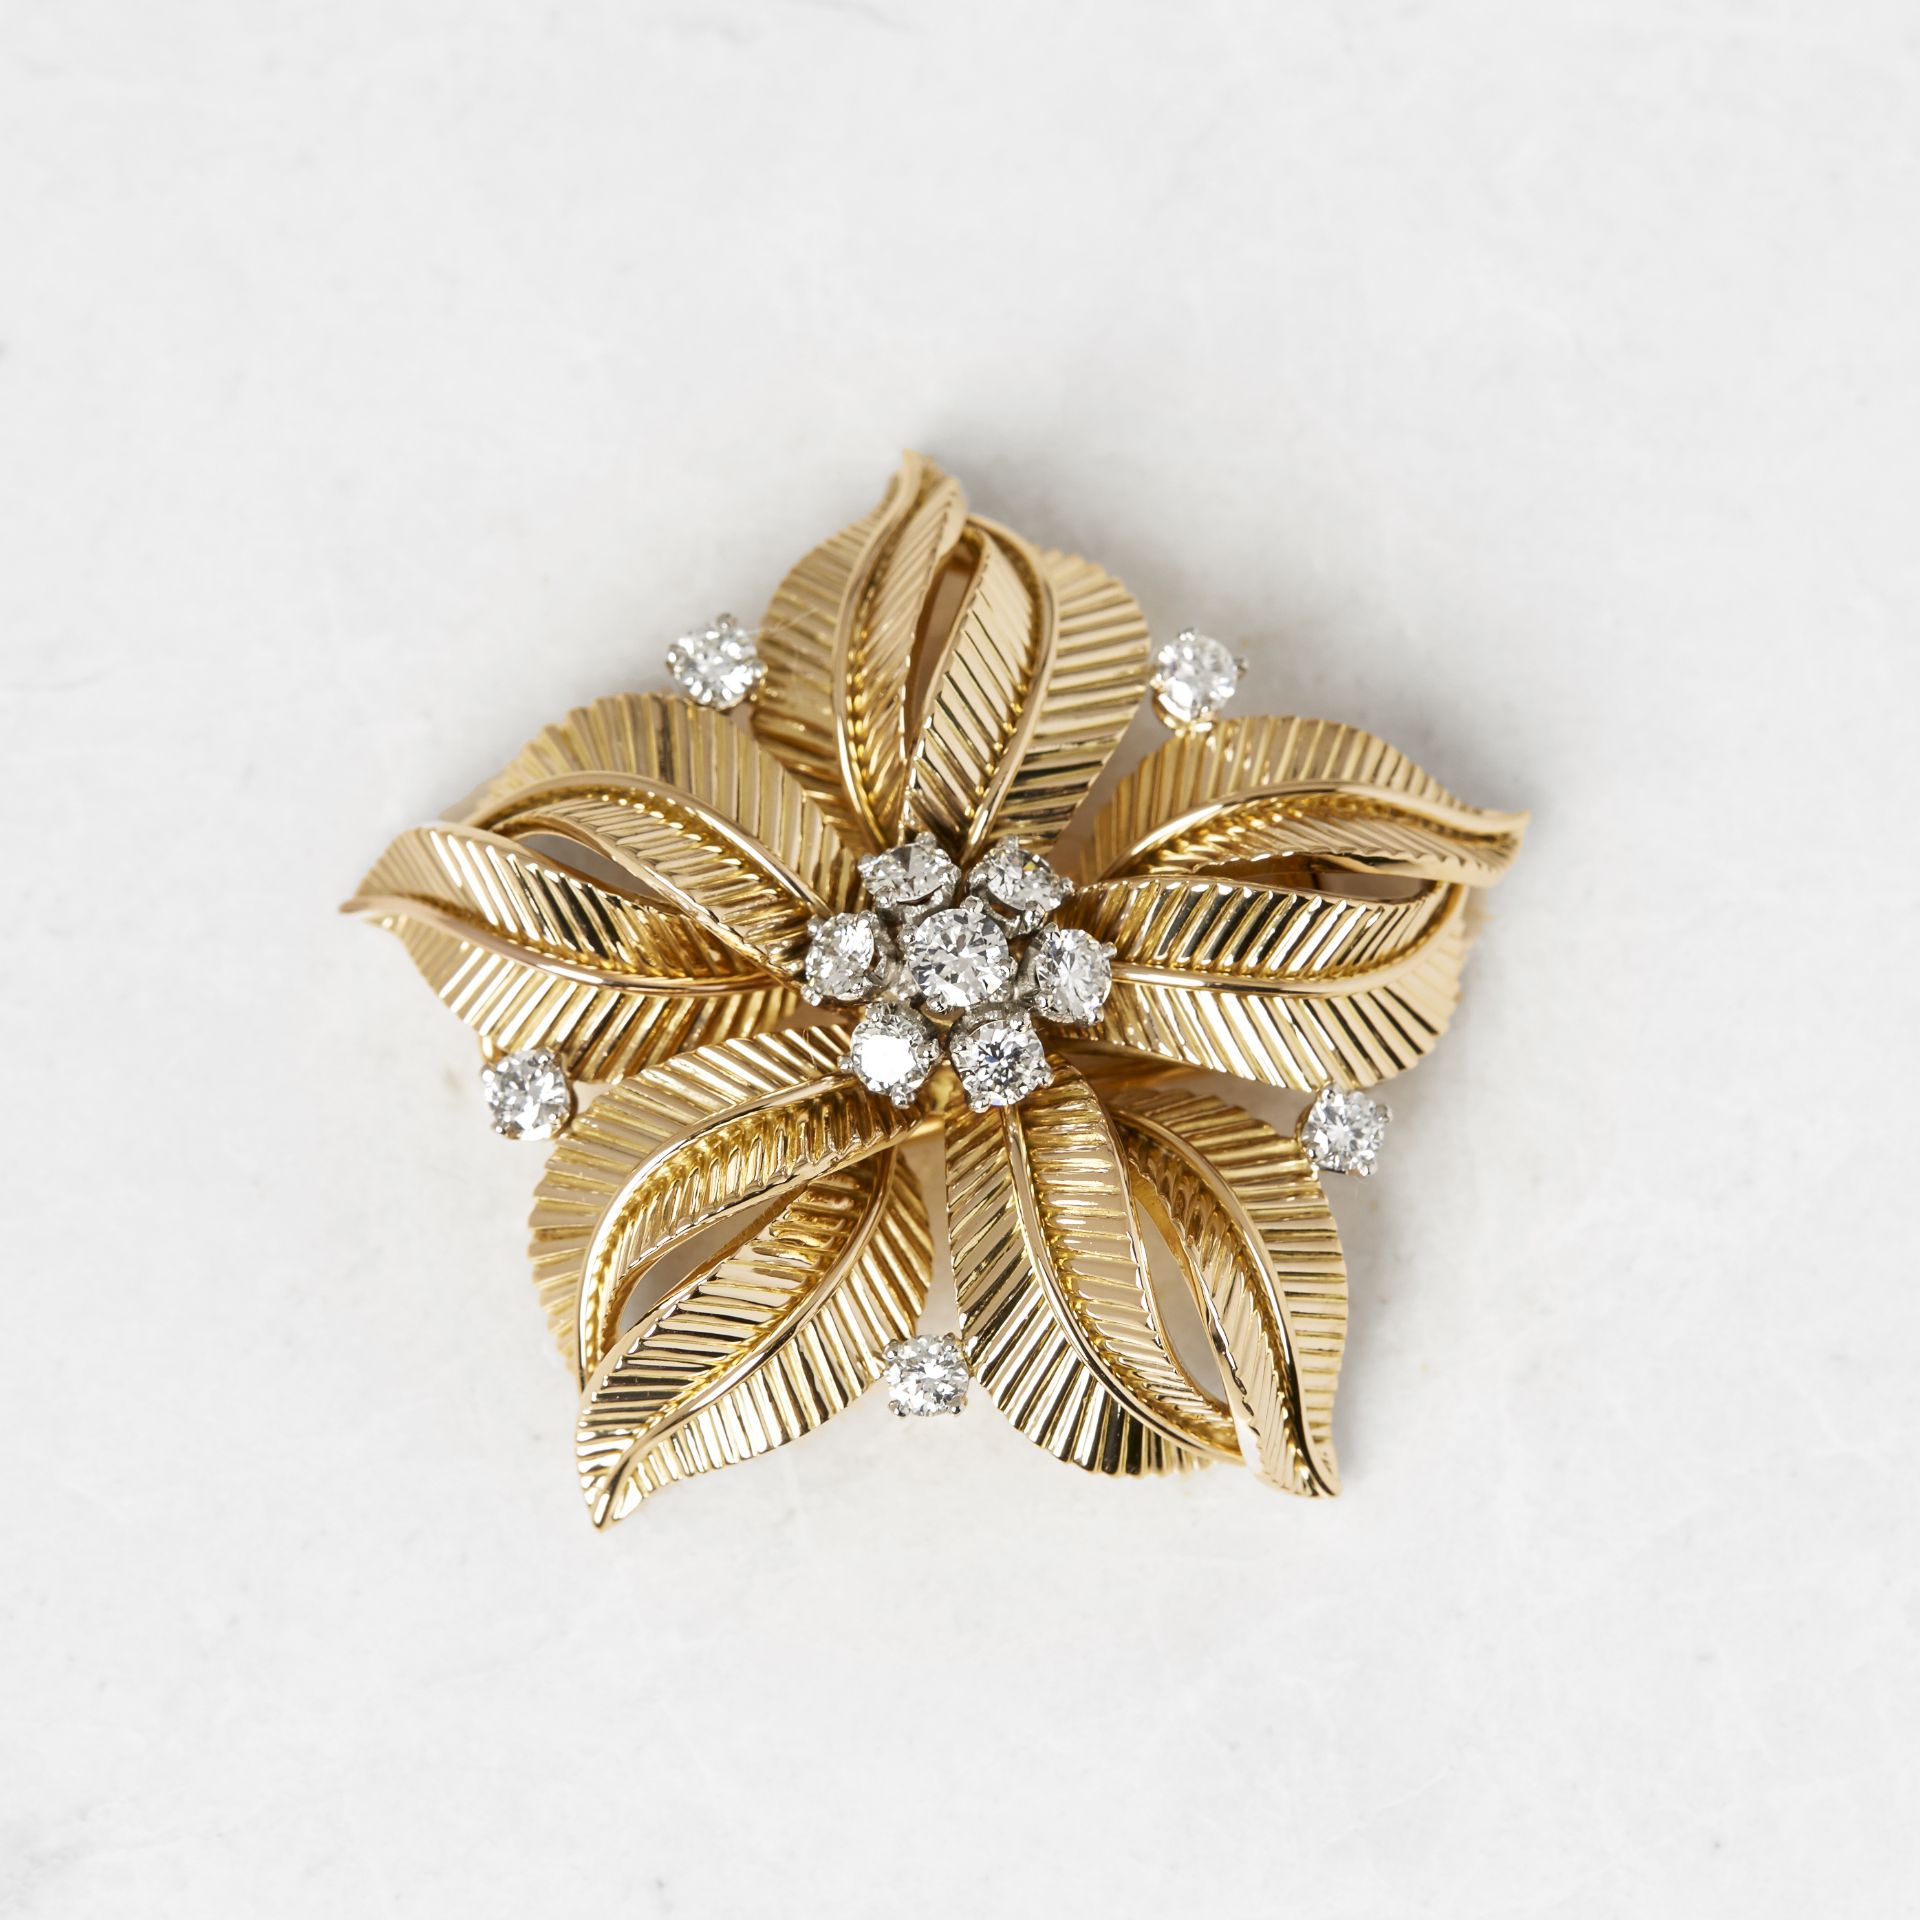 Cartier 18k Yellow Gold 1.09ct Diamond Flower Brooch with Presentation Box - Image 2 of 21